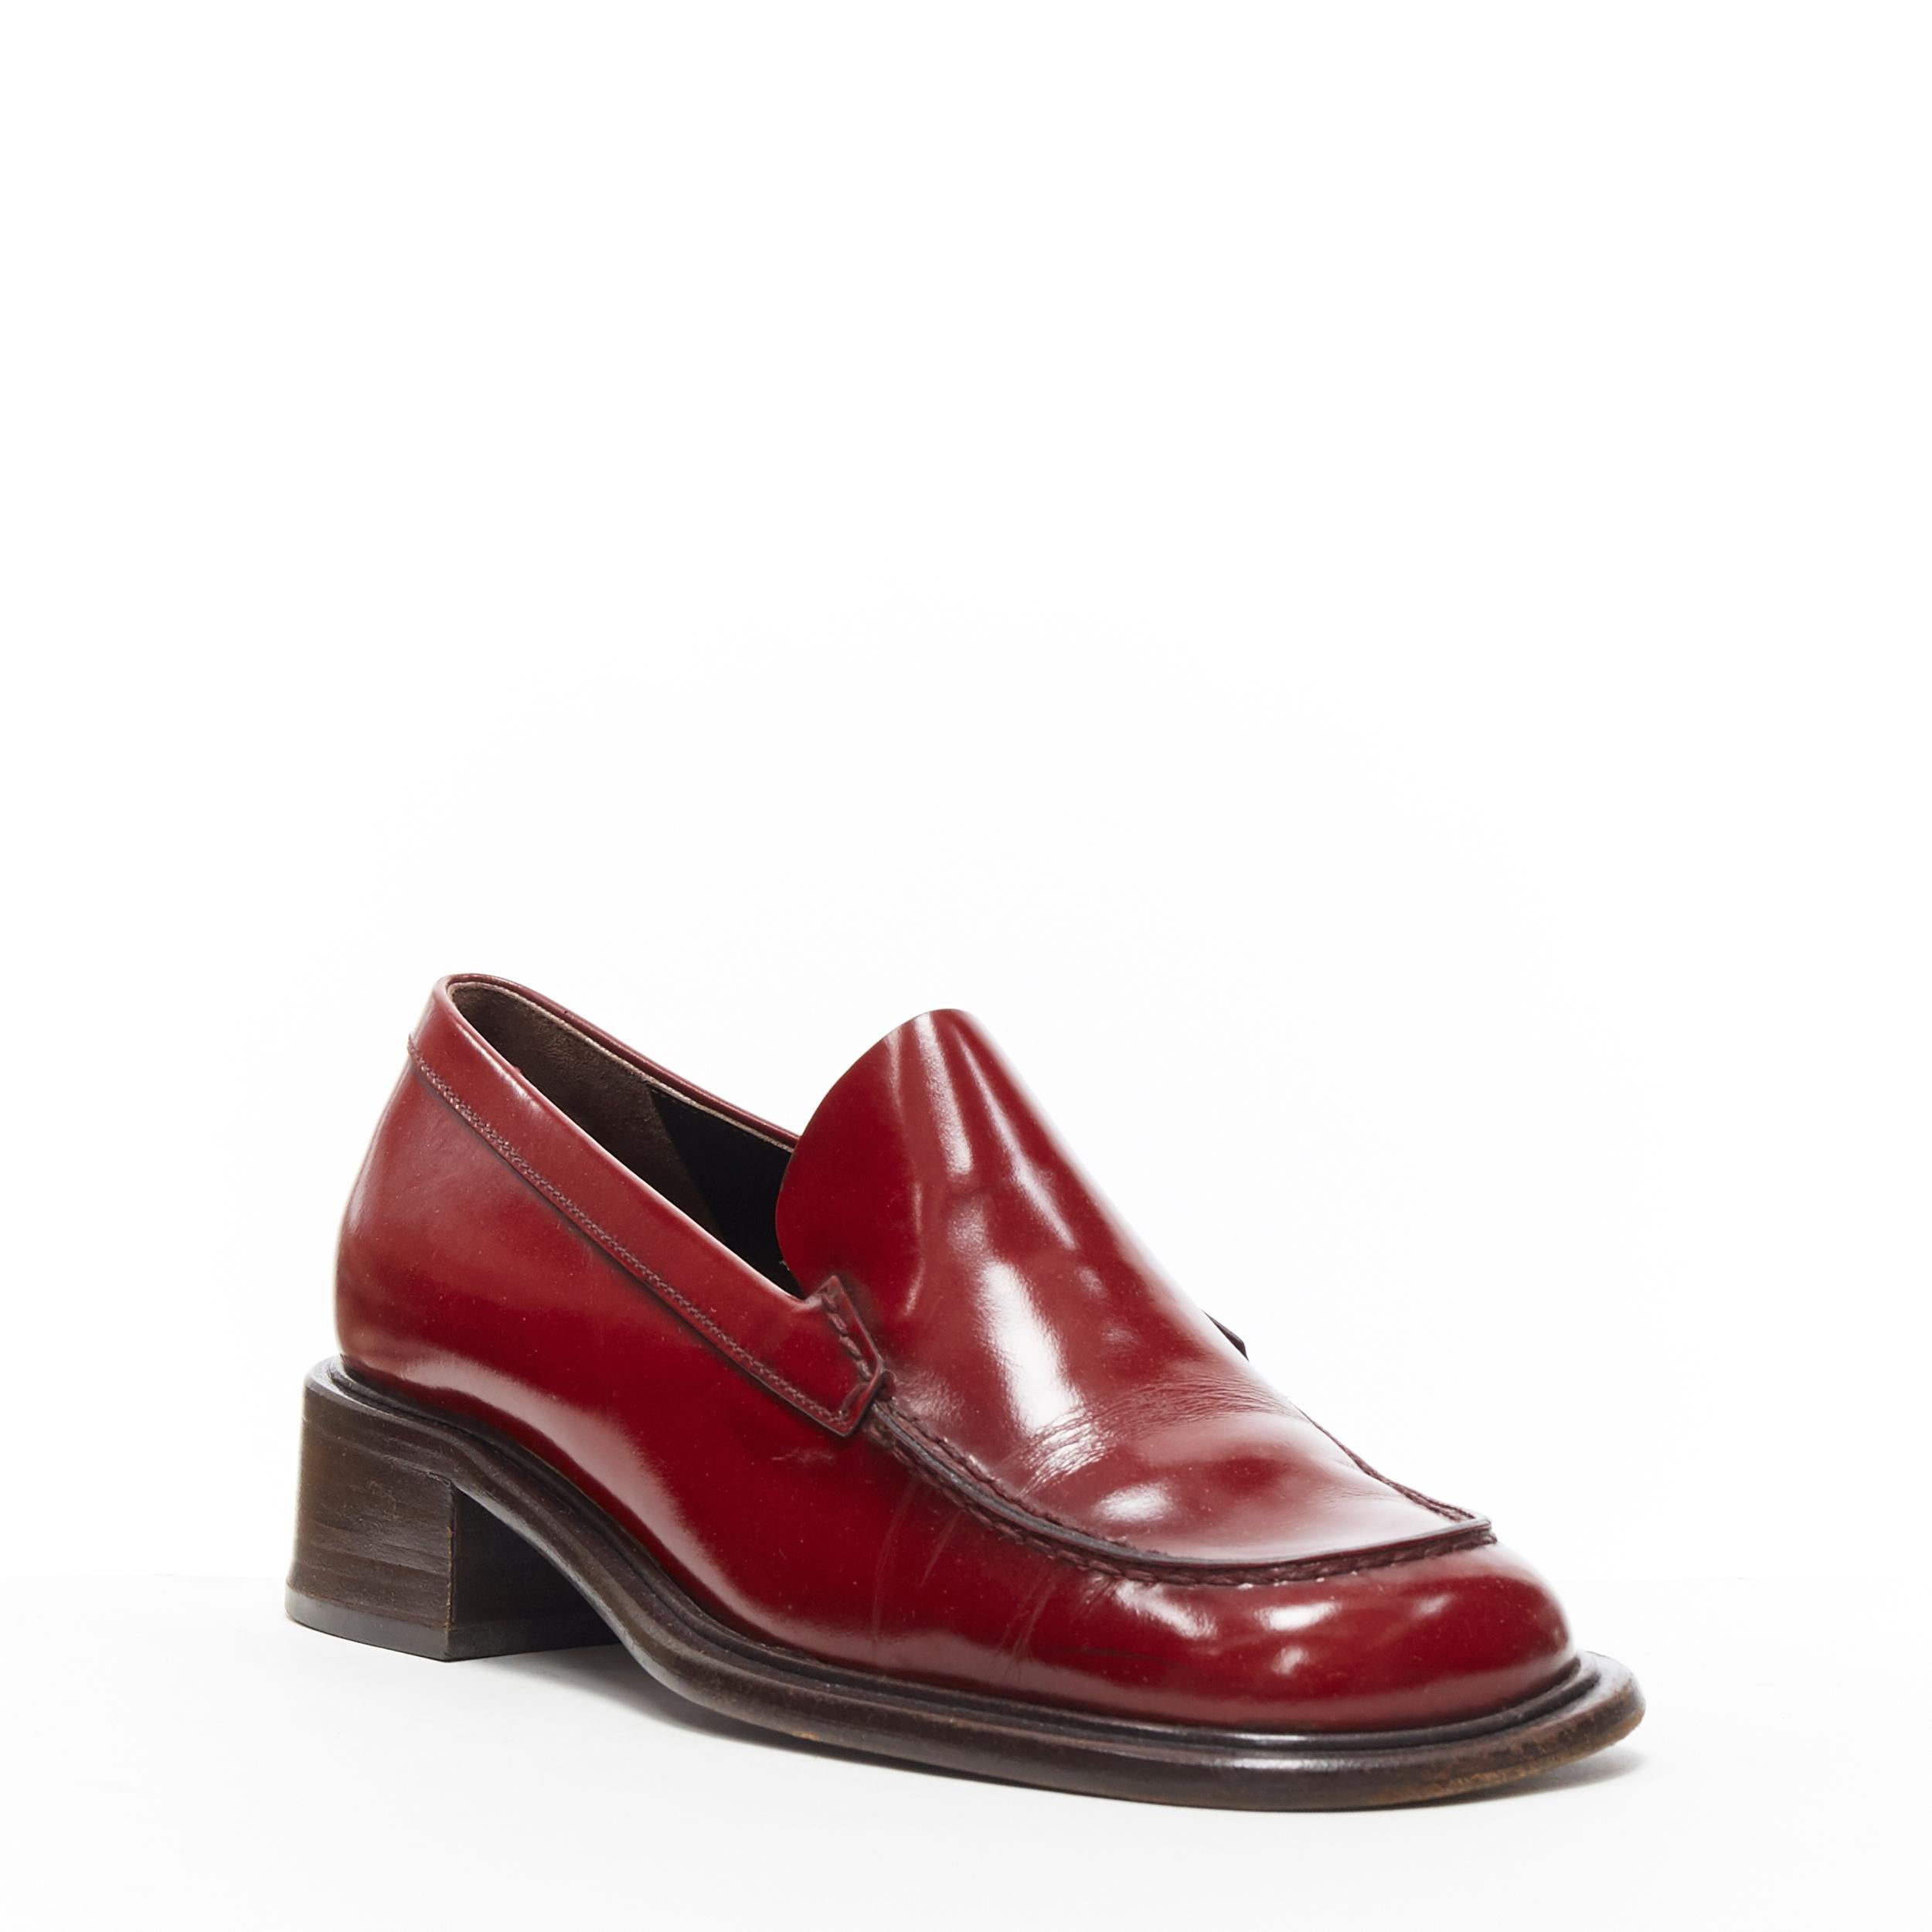 vintage PRADA red polished leather square toe chunky heel loafer EU34.5
Brand: Prada
Designer: Miuccia Prada
Model Name / Style: Loafer
Material: Leather
Color: Red
Pattern: Solid
Closure: Slip on
Extra Detail: Mid (2-2.9 in) heel height. Square